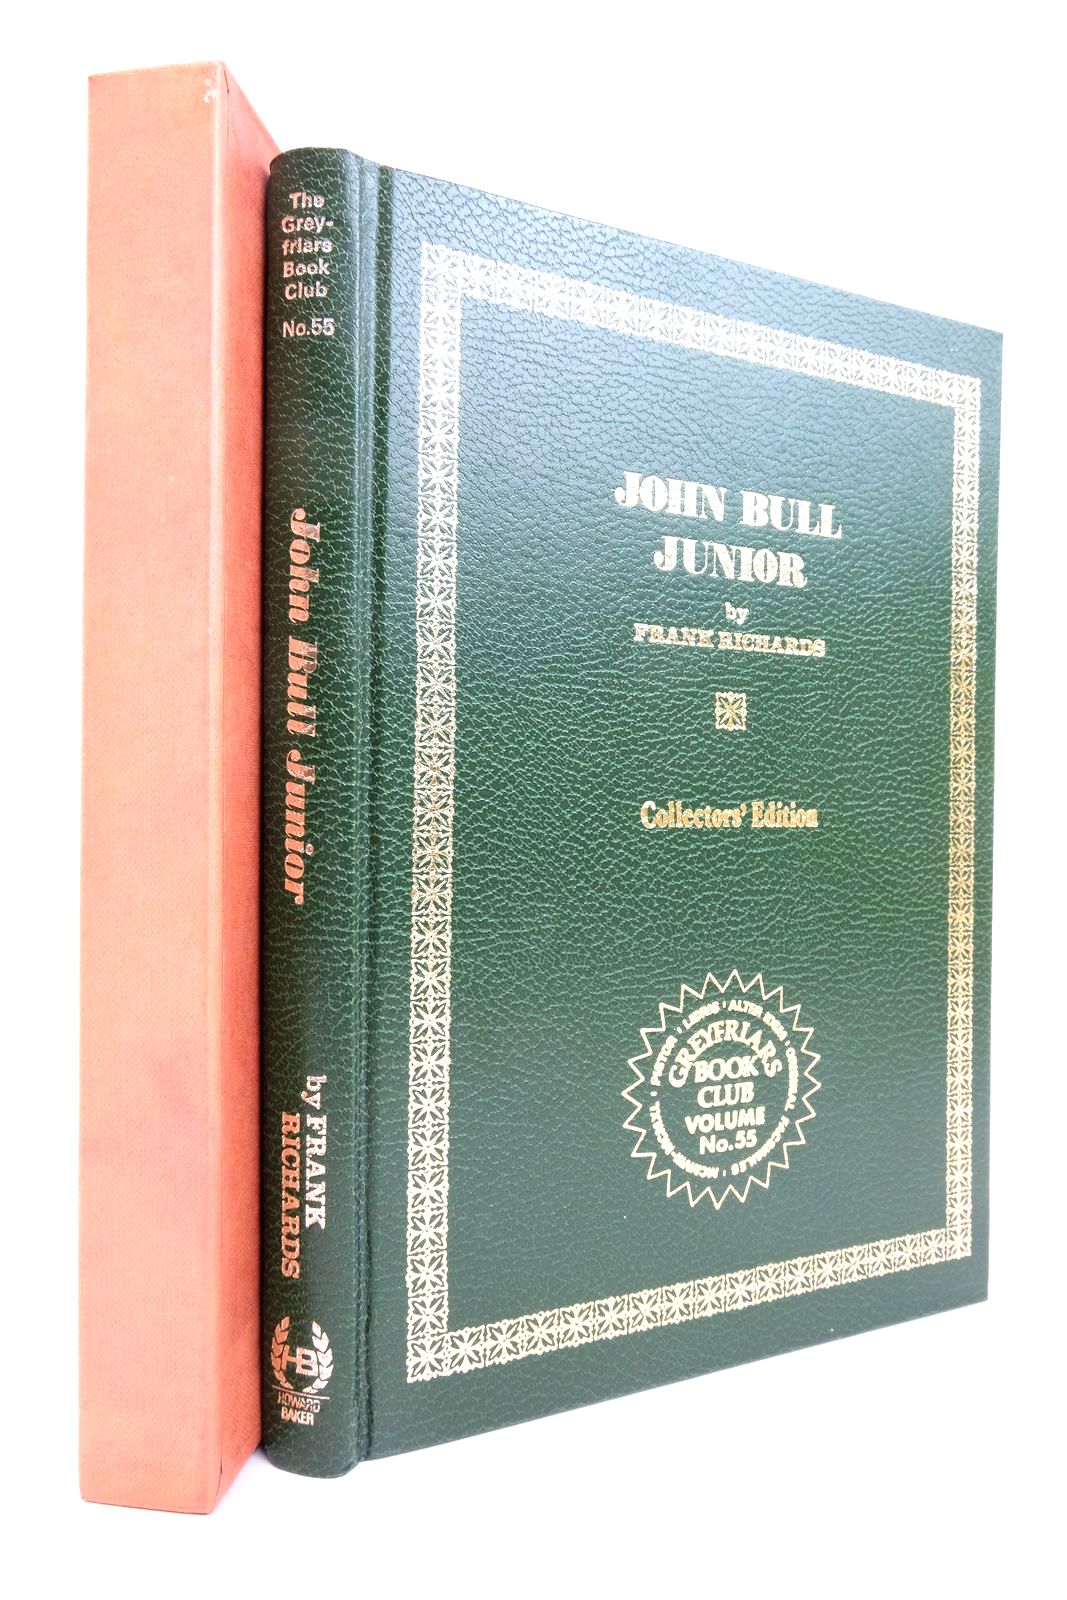 Photo of JOHN BULL JUNIOR written by Richards, Frank published by Howard Baker (STOCK CODE: 2136642)  for sale by Stella & Rose's Books